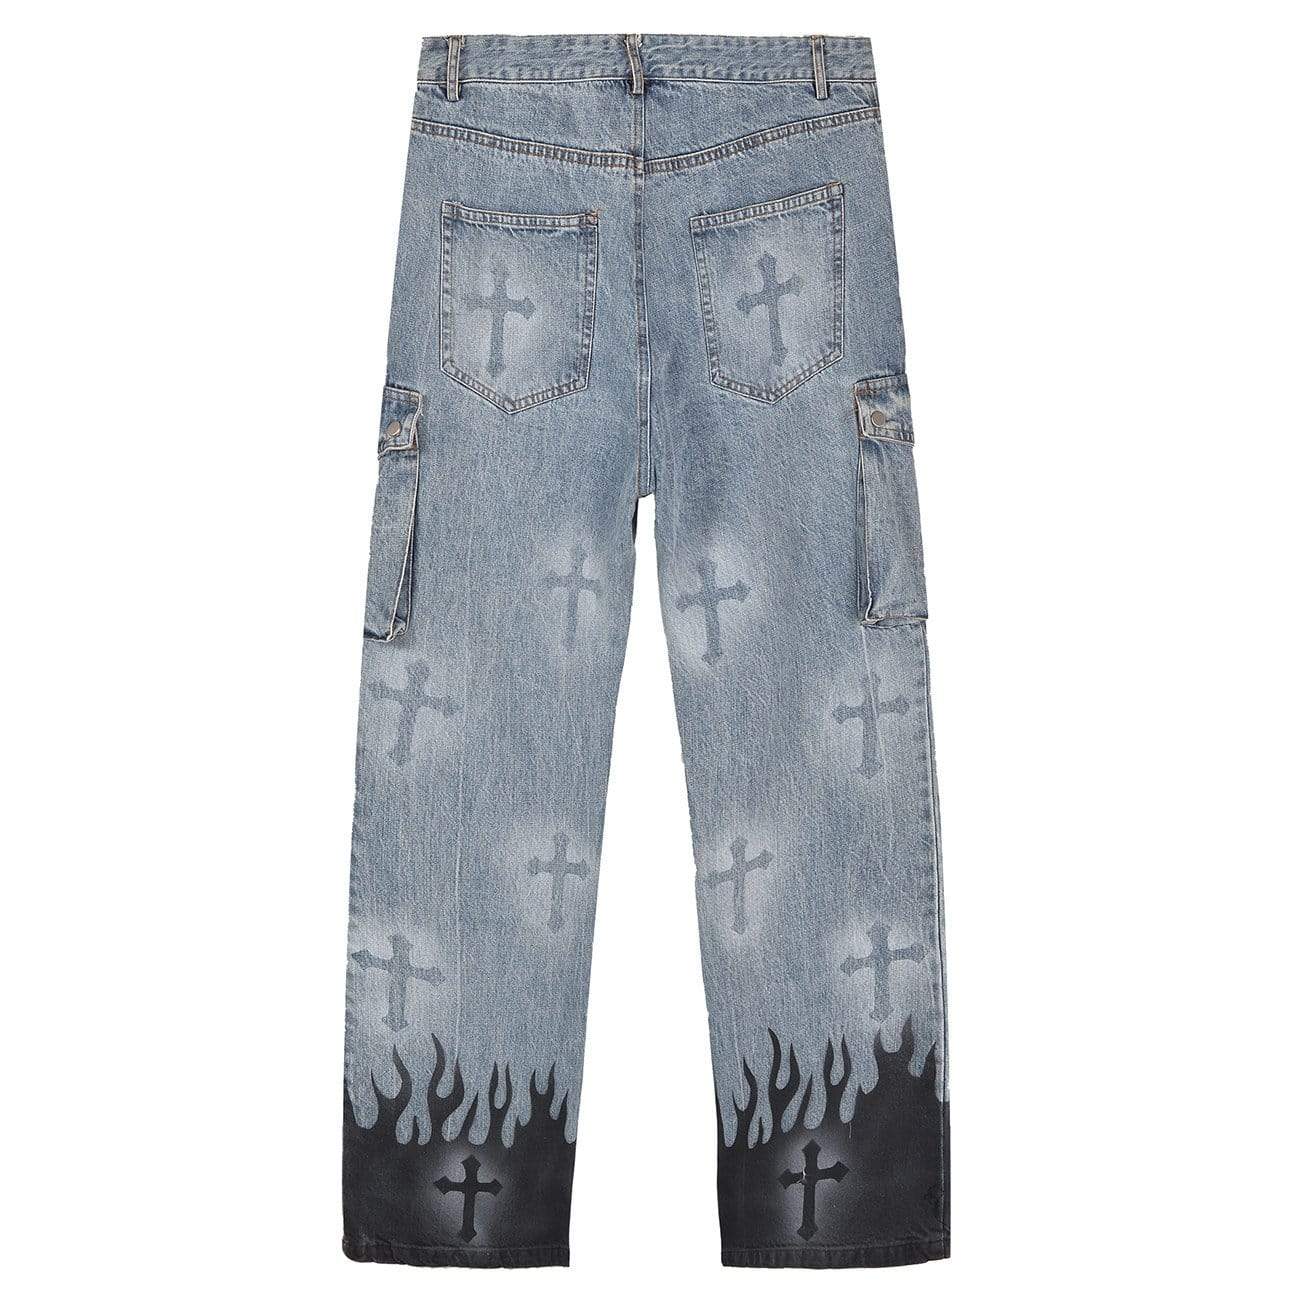 TO Printed Straight Denim Jeans